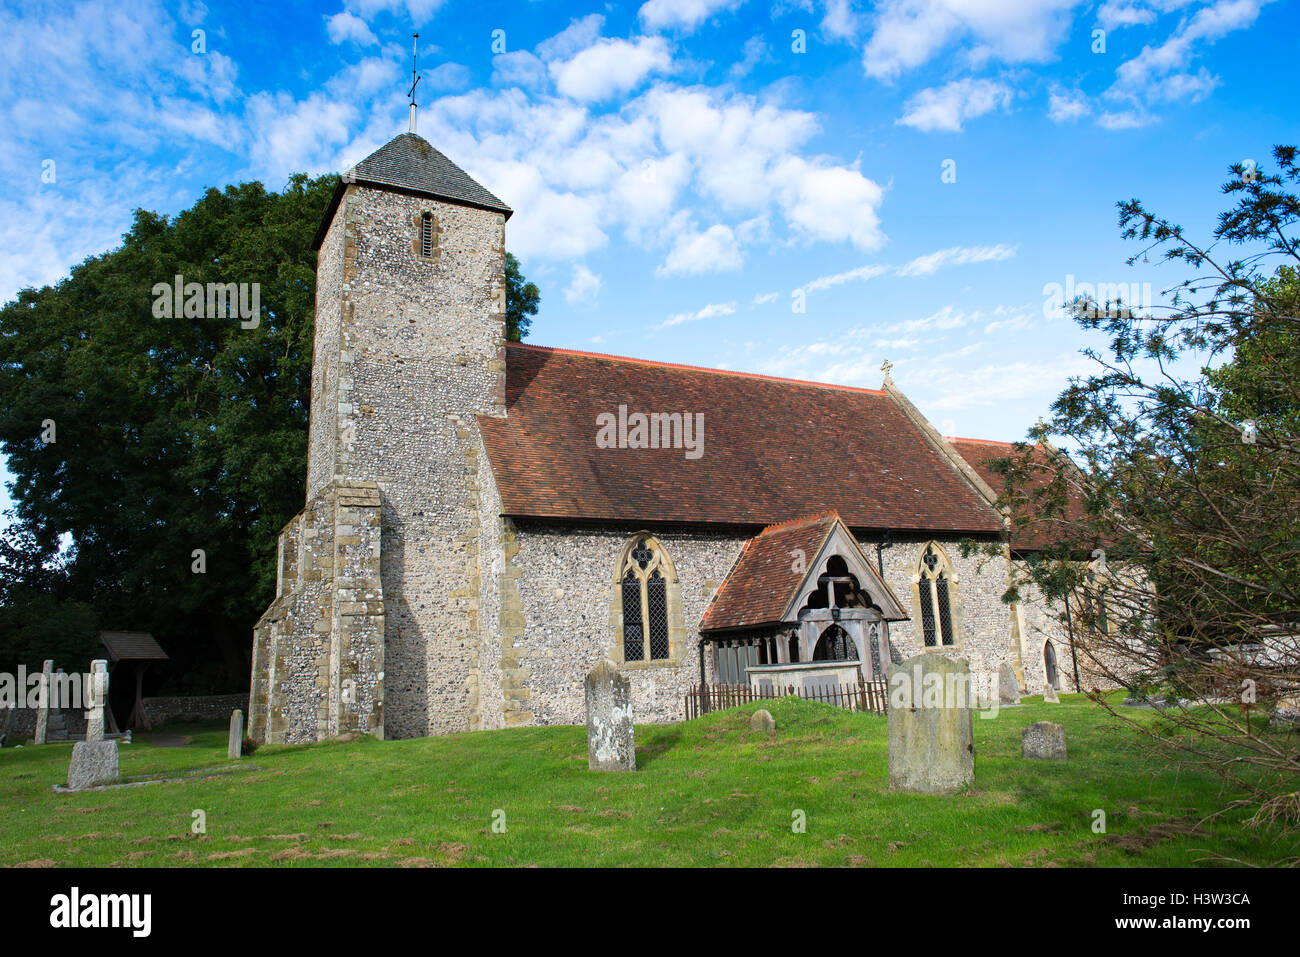 The Church of St Pancras in the village of Kingston near Lewes, East Sussex, England, UK Stock Photo